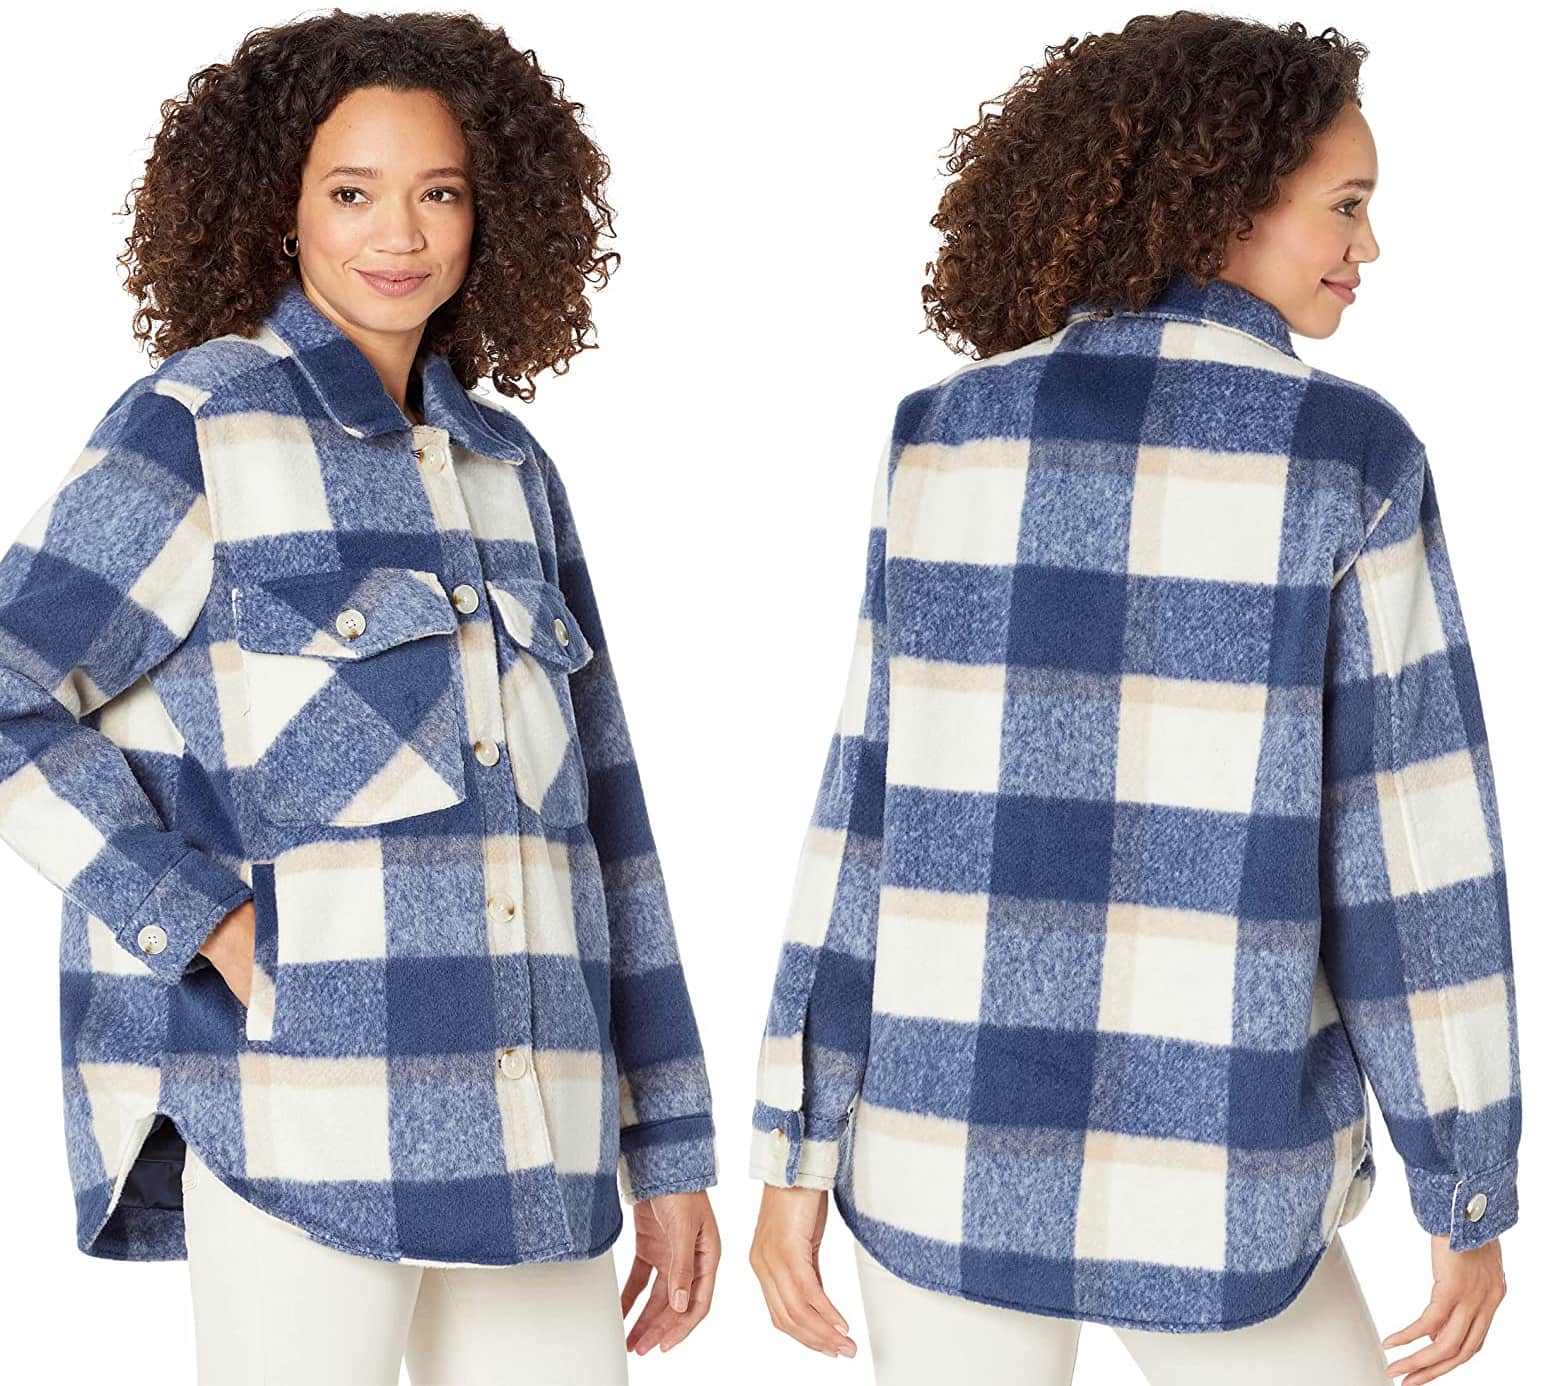 Blank NYC's plaid shirt jacket has a relaxed fit, a point collar, and front and side pockets